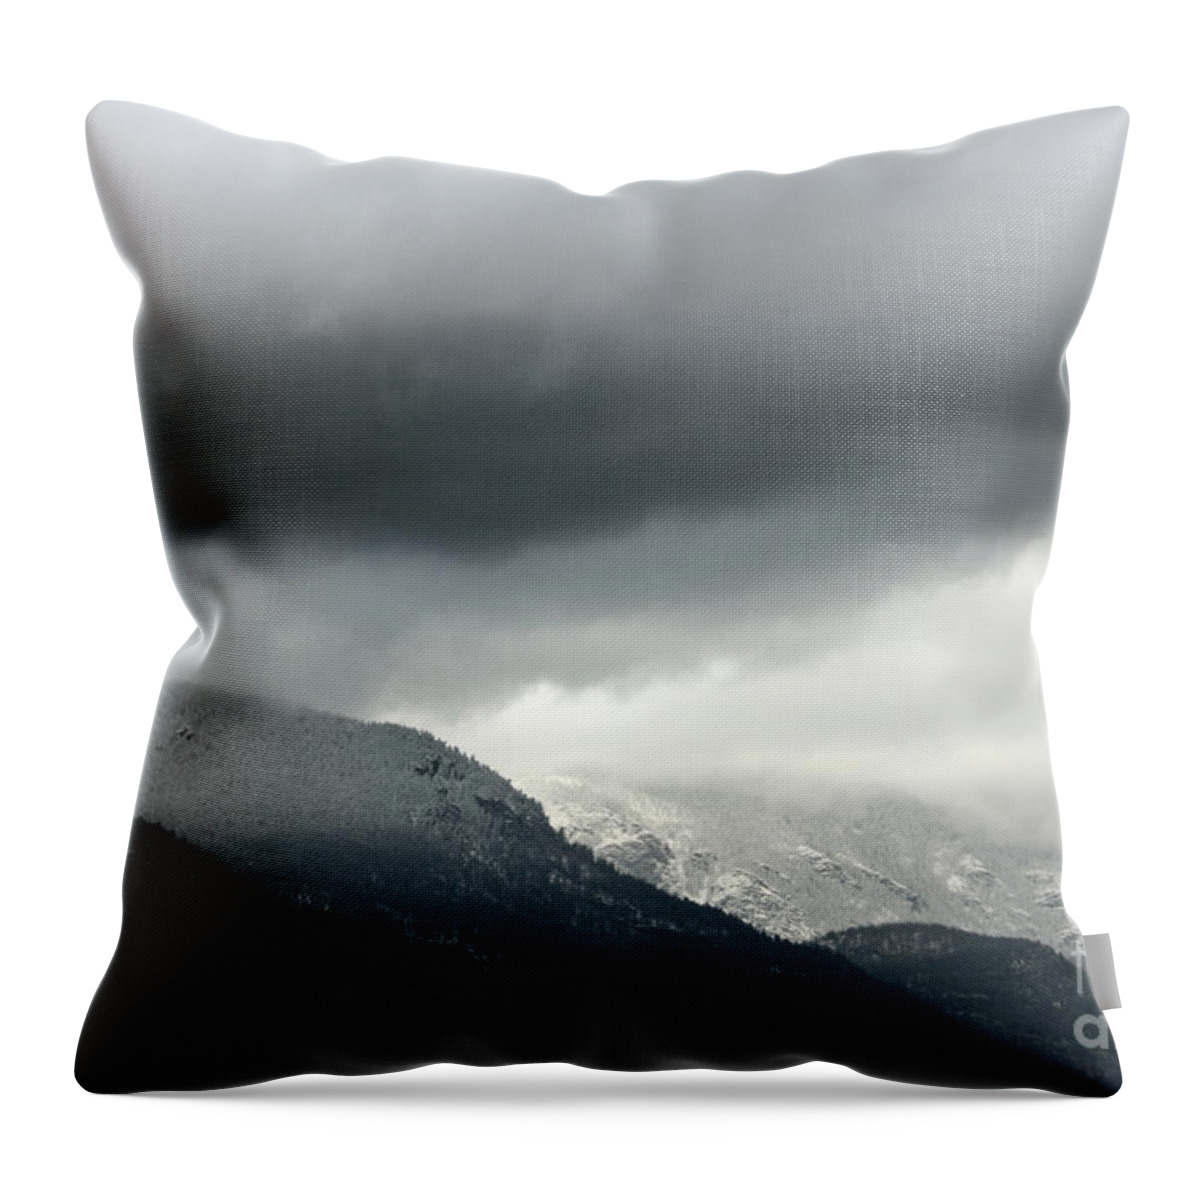 Mountains Throw Pillow featuring the photograph The Valley by Dana DiPasquale